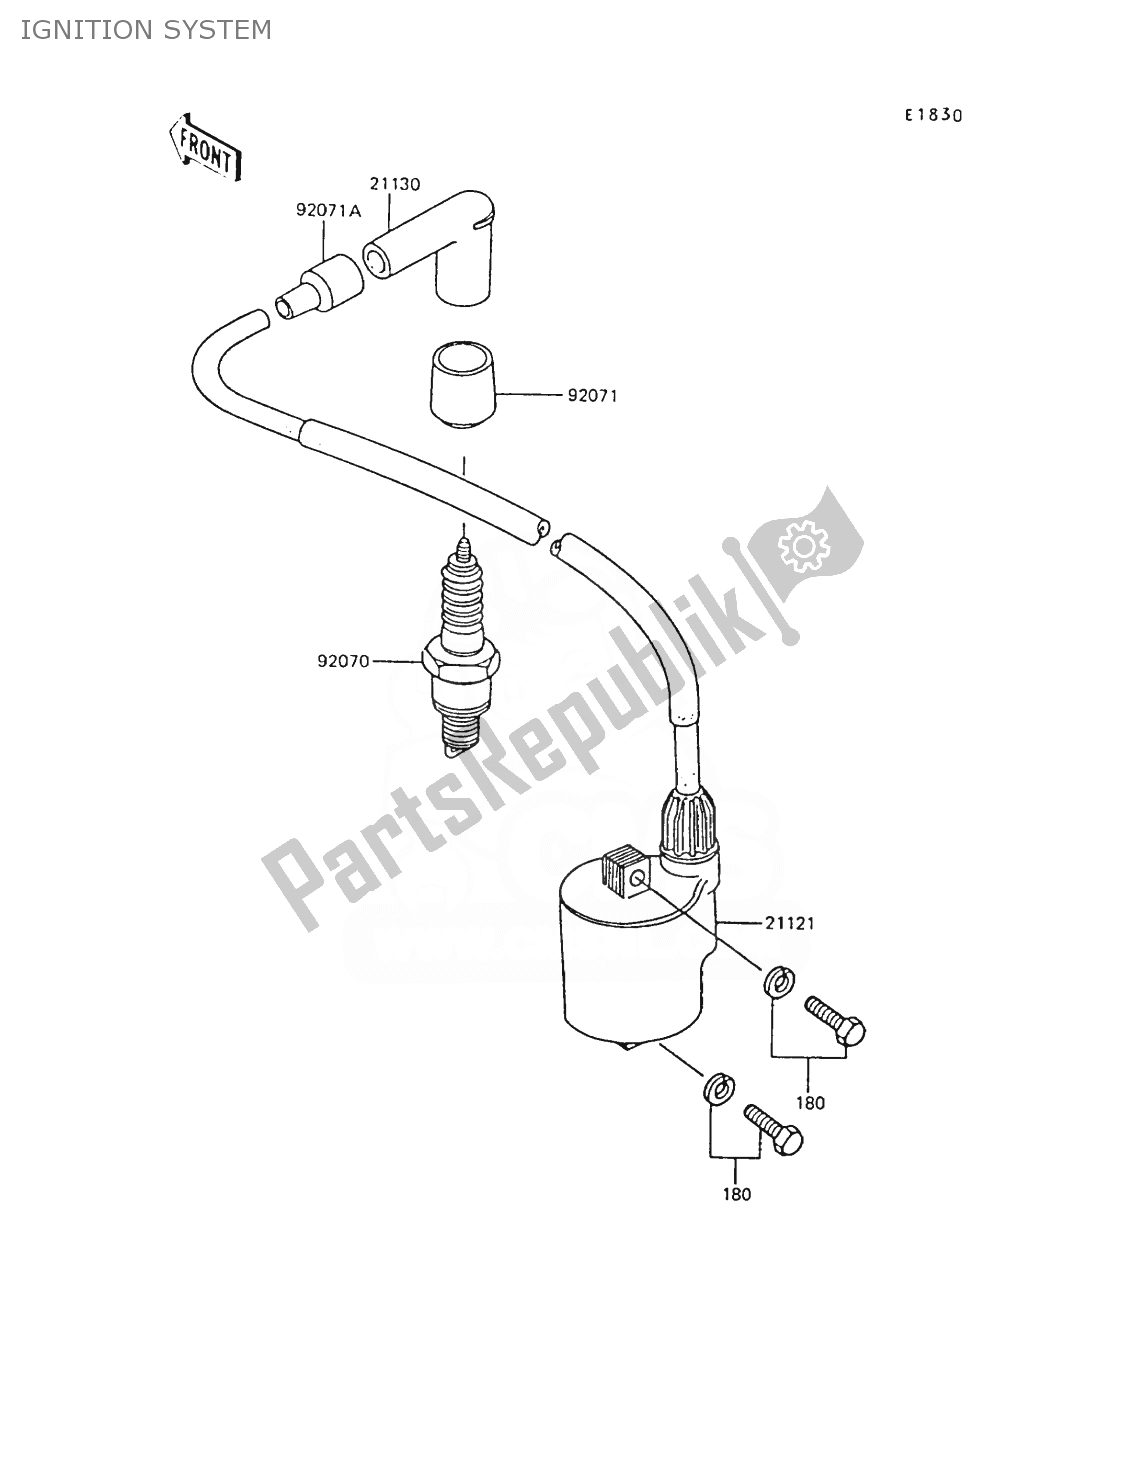 All parts for the Ignition System of the Kawasaki AR 80 1990